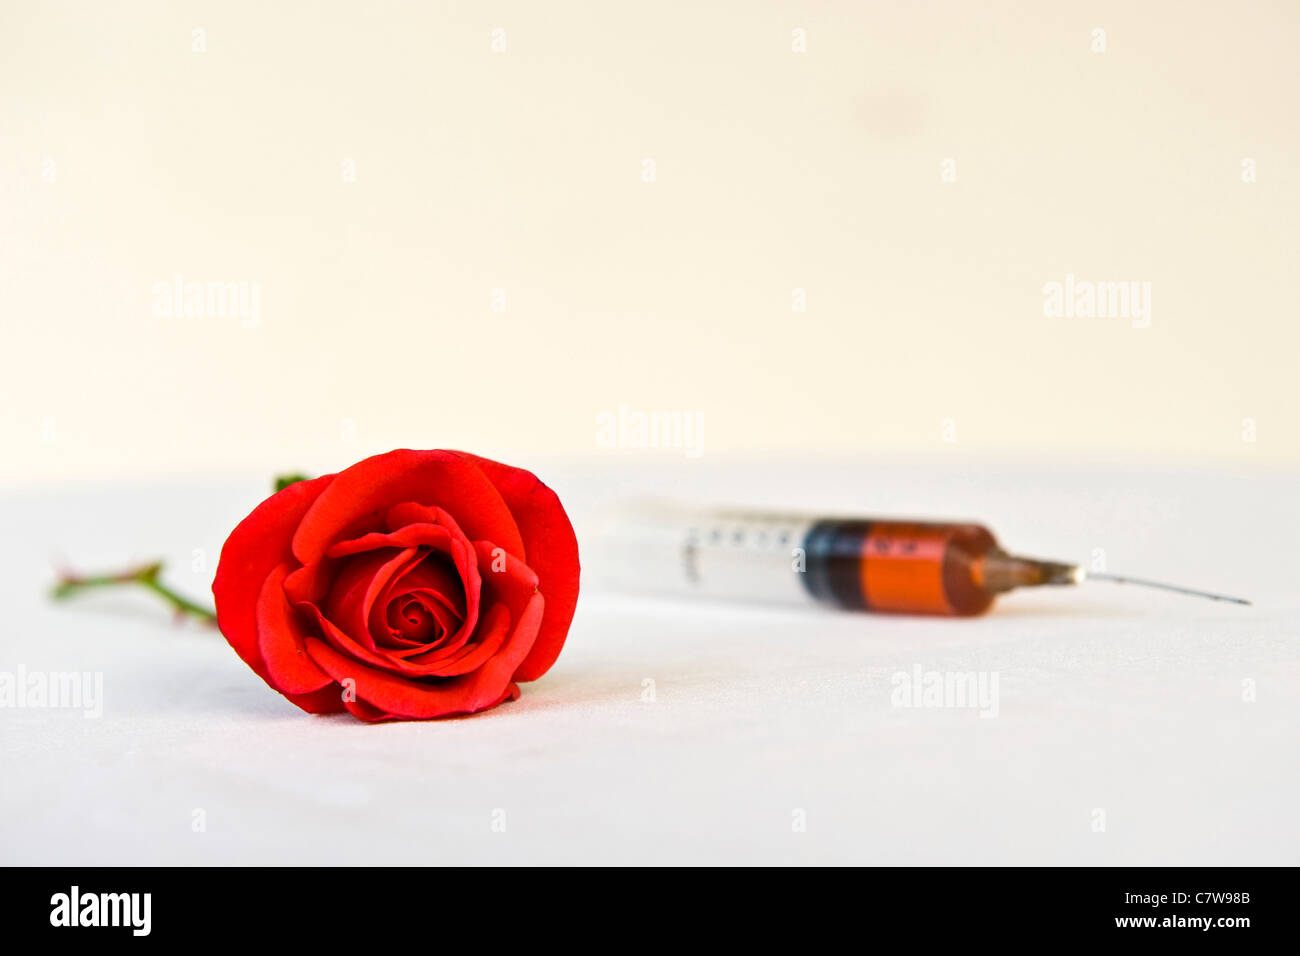 Still life of a syringe and red rose Stock Photo